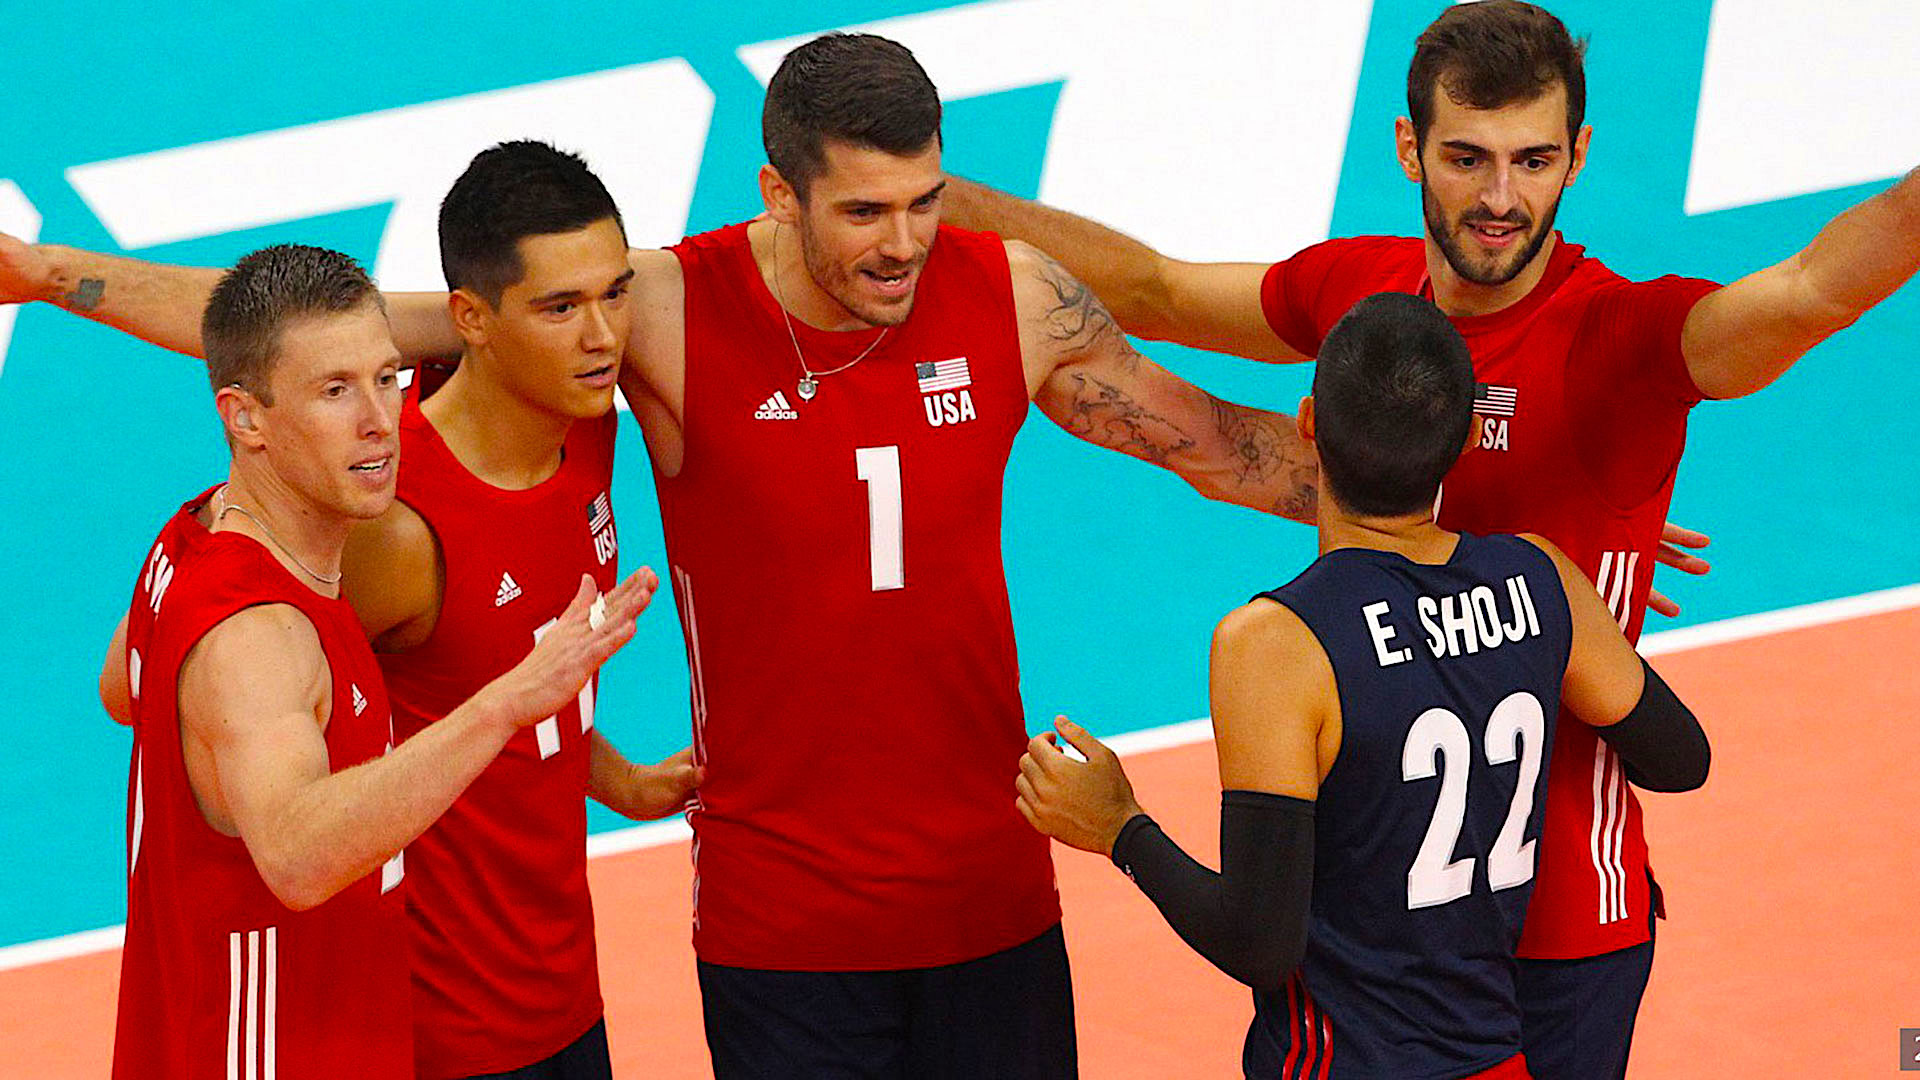 2022 FIVB Volleyball Men's World Championship VolleyCountry